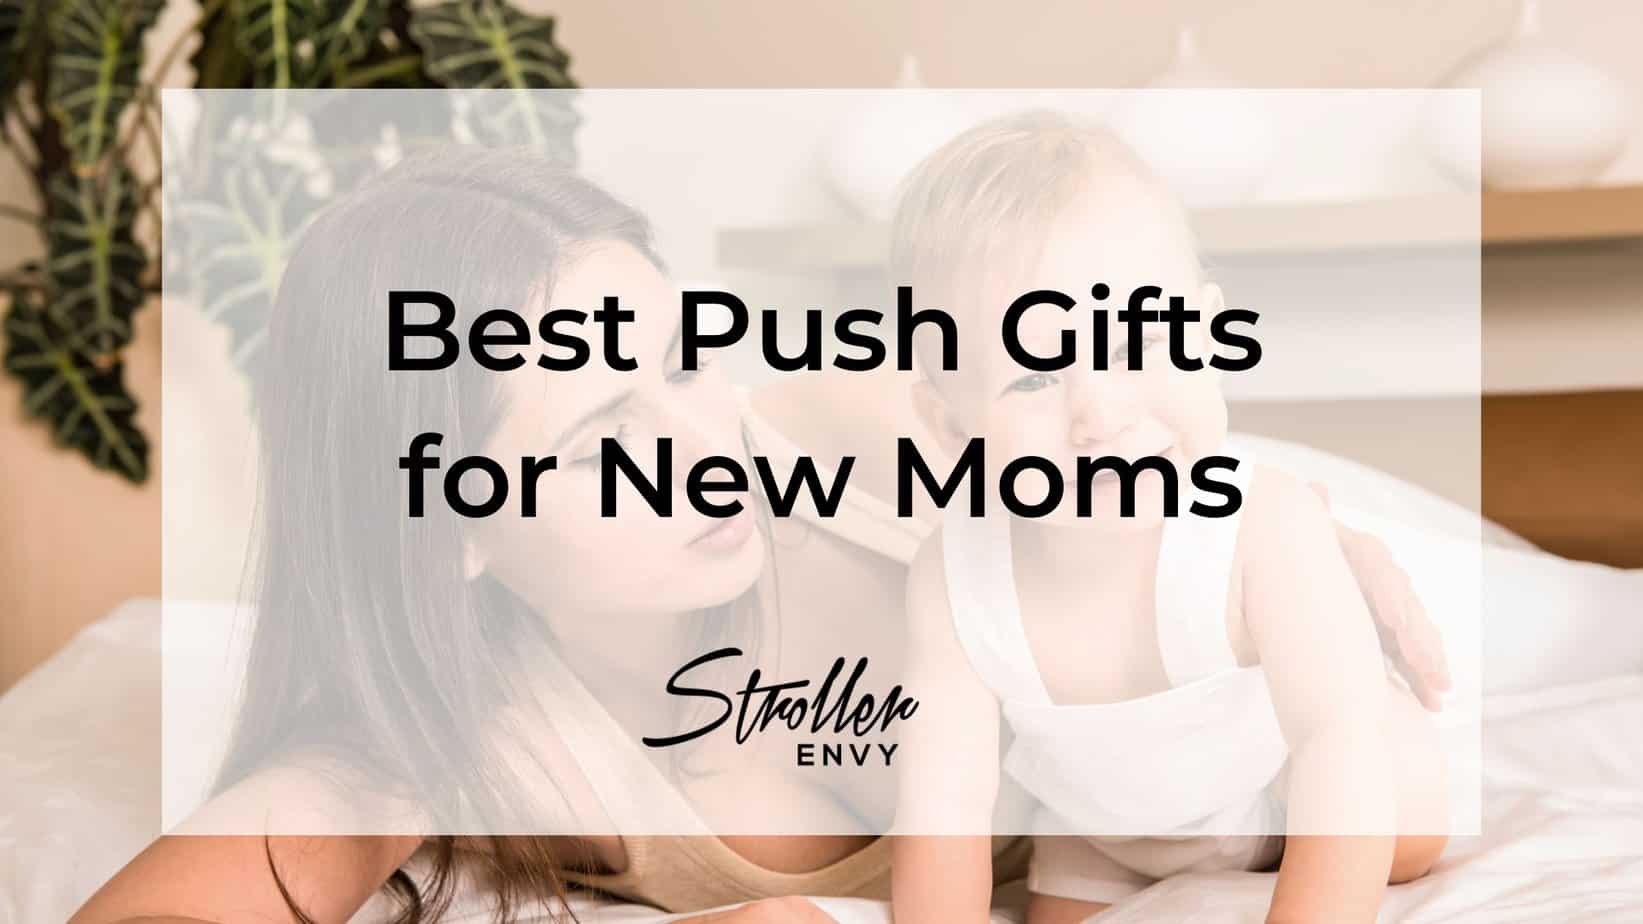 Best Push Gifts for New Moms